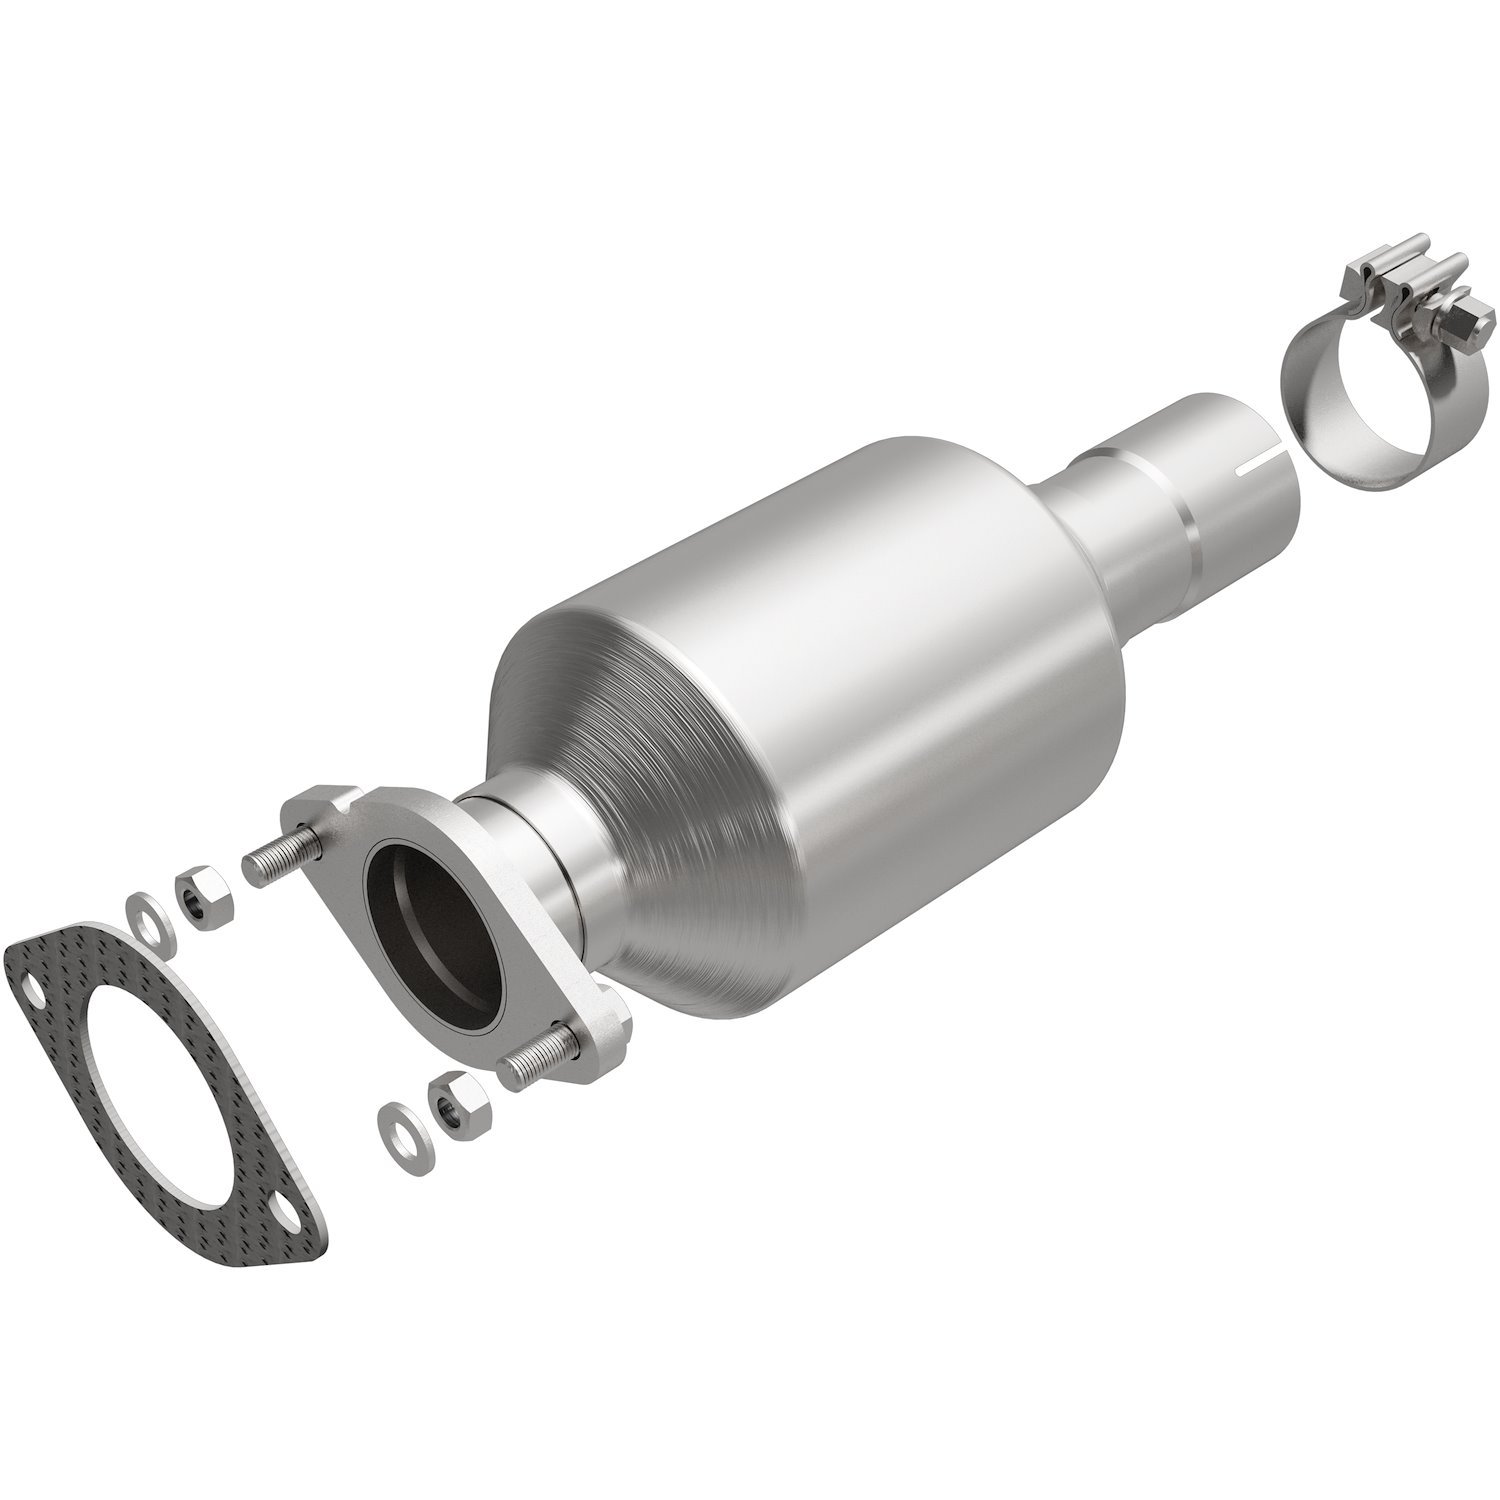 2013-2016 Ford C-Max California Grade CARB Compliant Direct-Fit Catalytic Converter